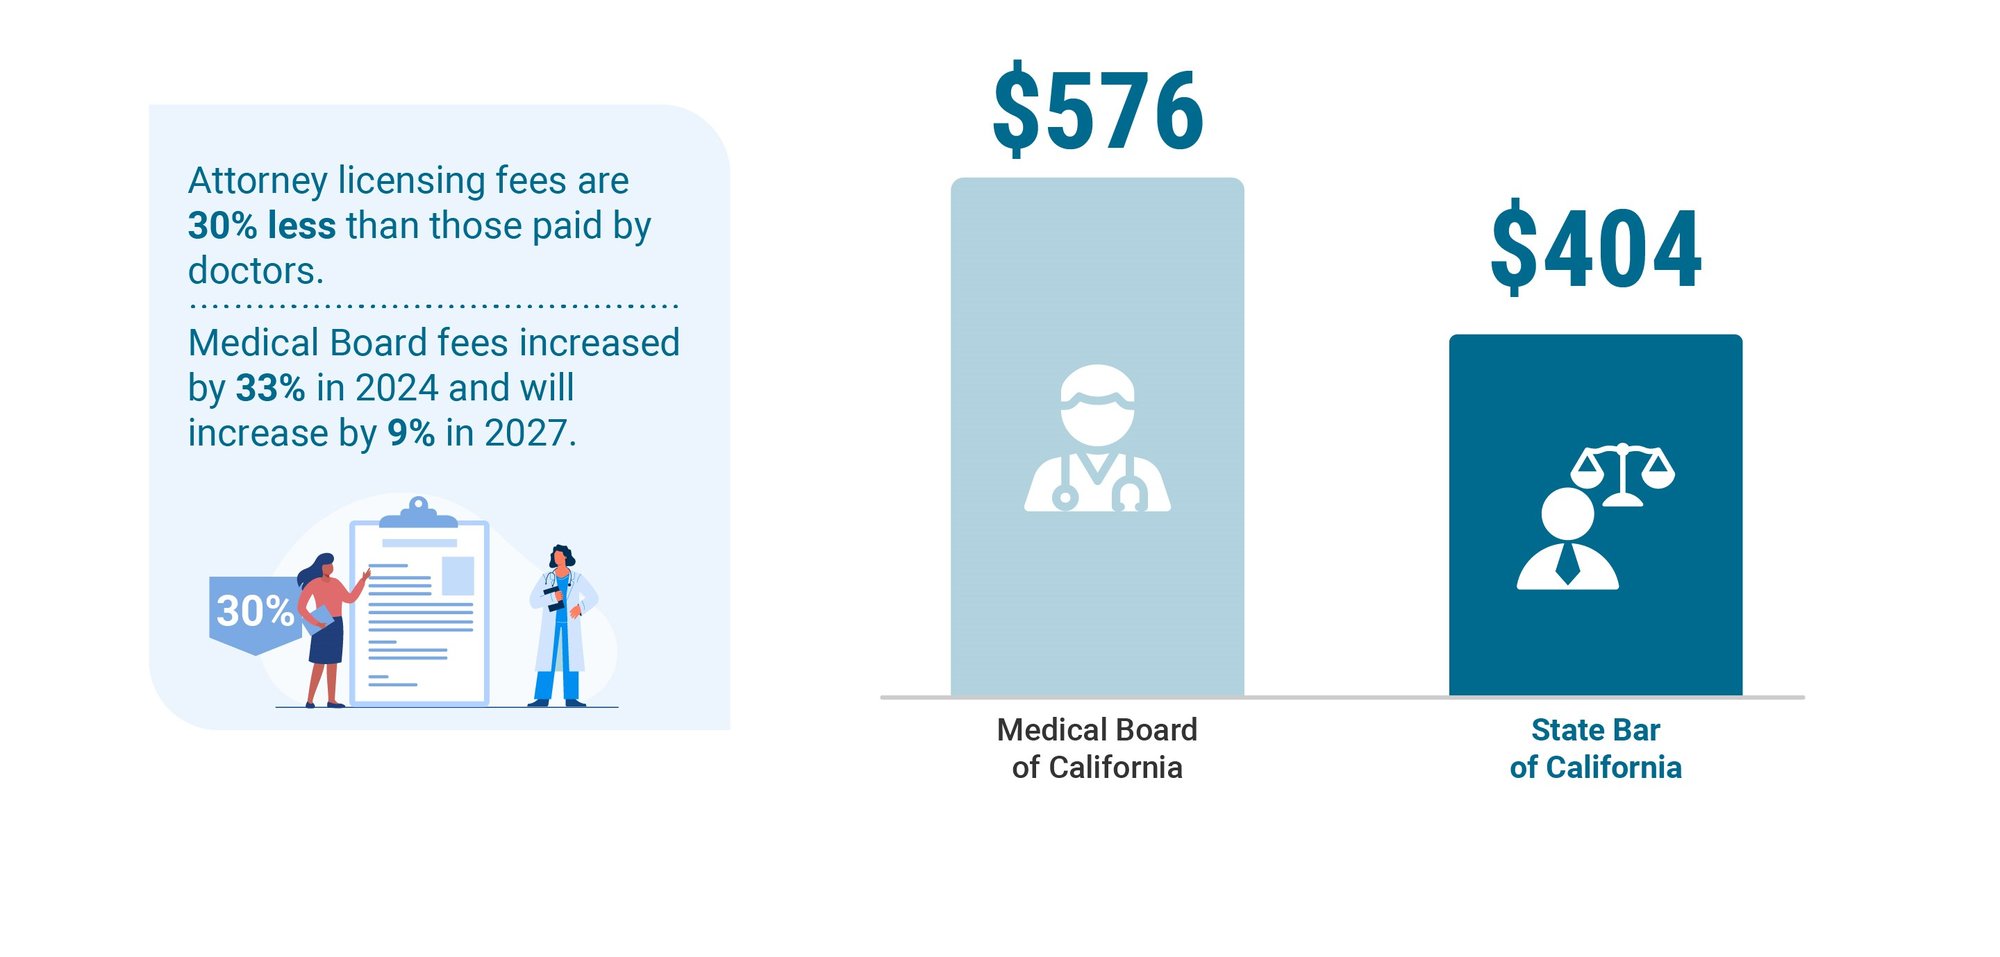 CA attorney licensing fees are 30 percent less than those paid by CA doctors.